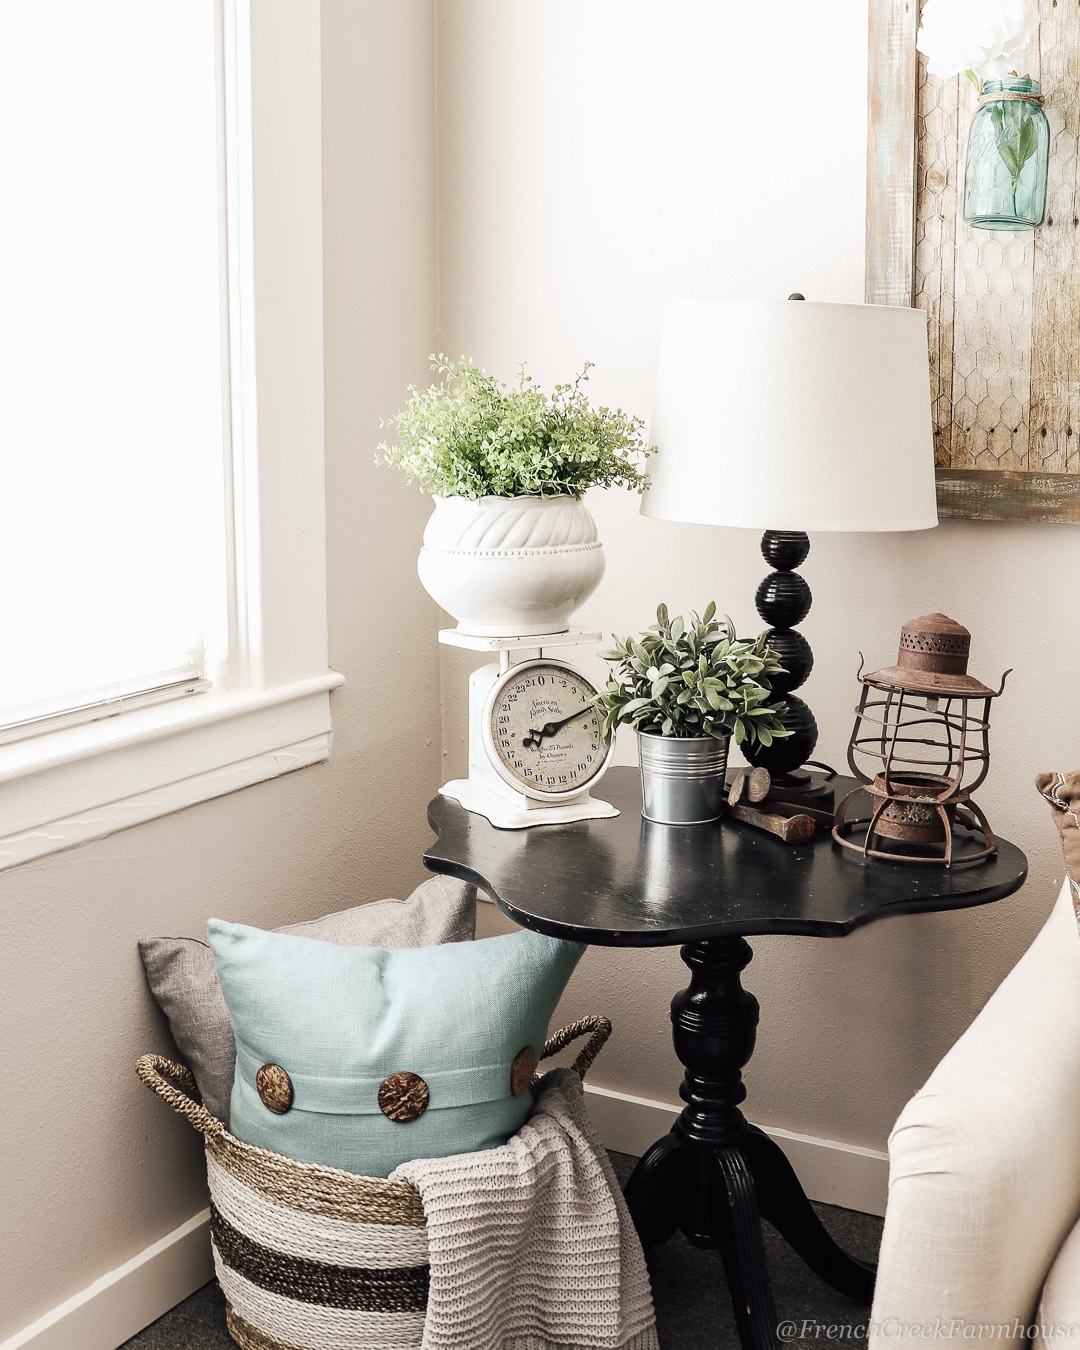 A vintage scale is great for adding height to vignettes